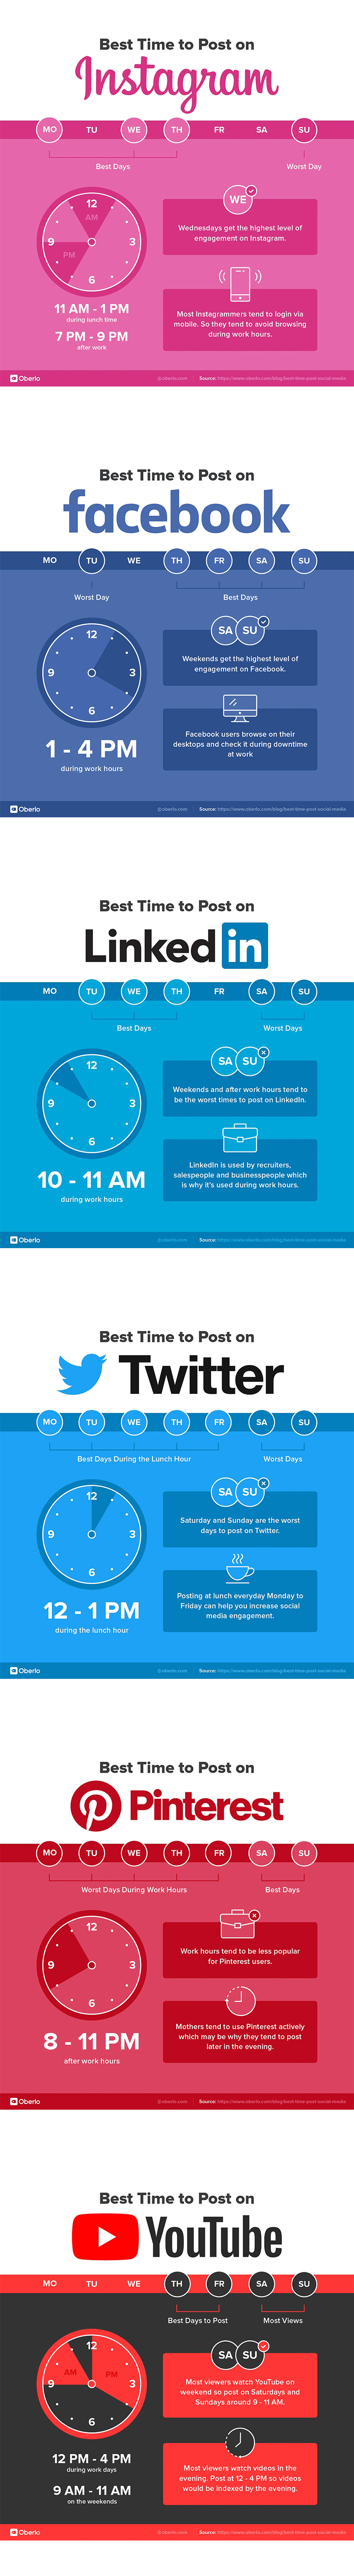 The Best Times to Post on Social Media in 2021 & Beyond [Infographic]